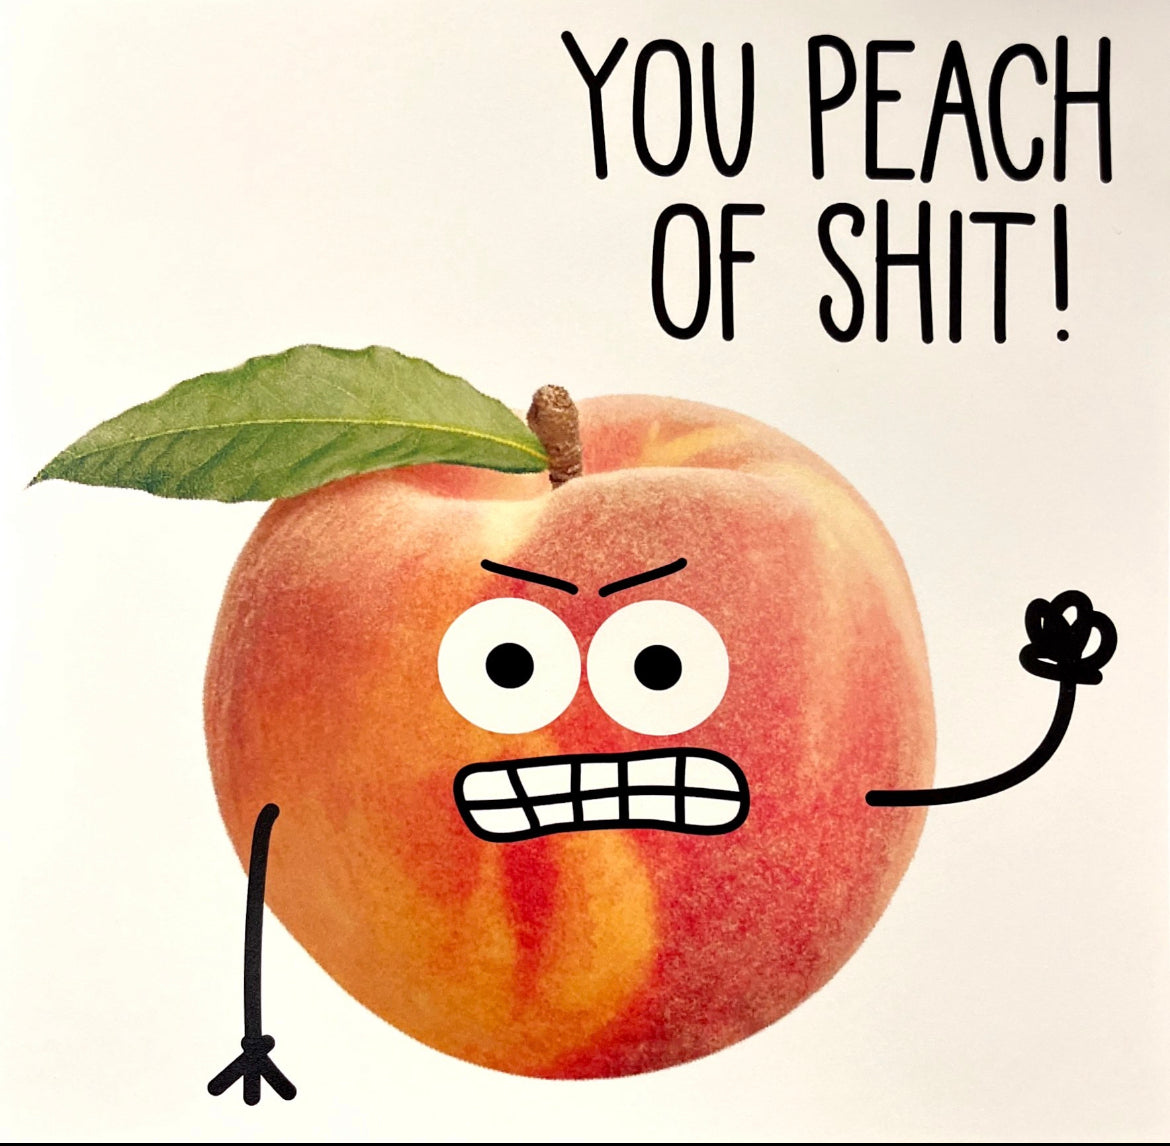 You Peach of Shit!